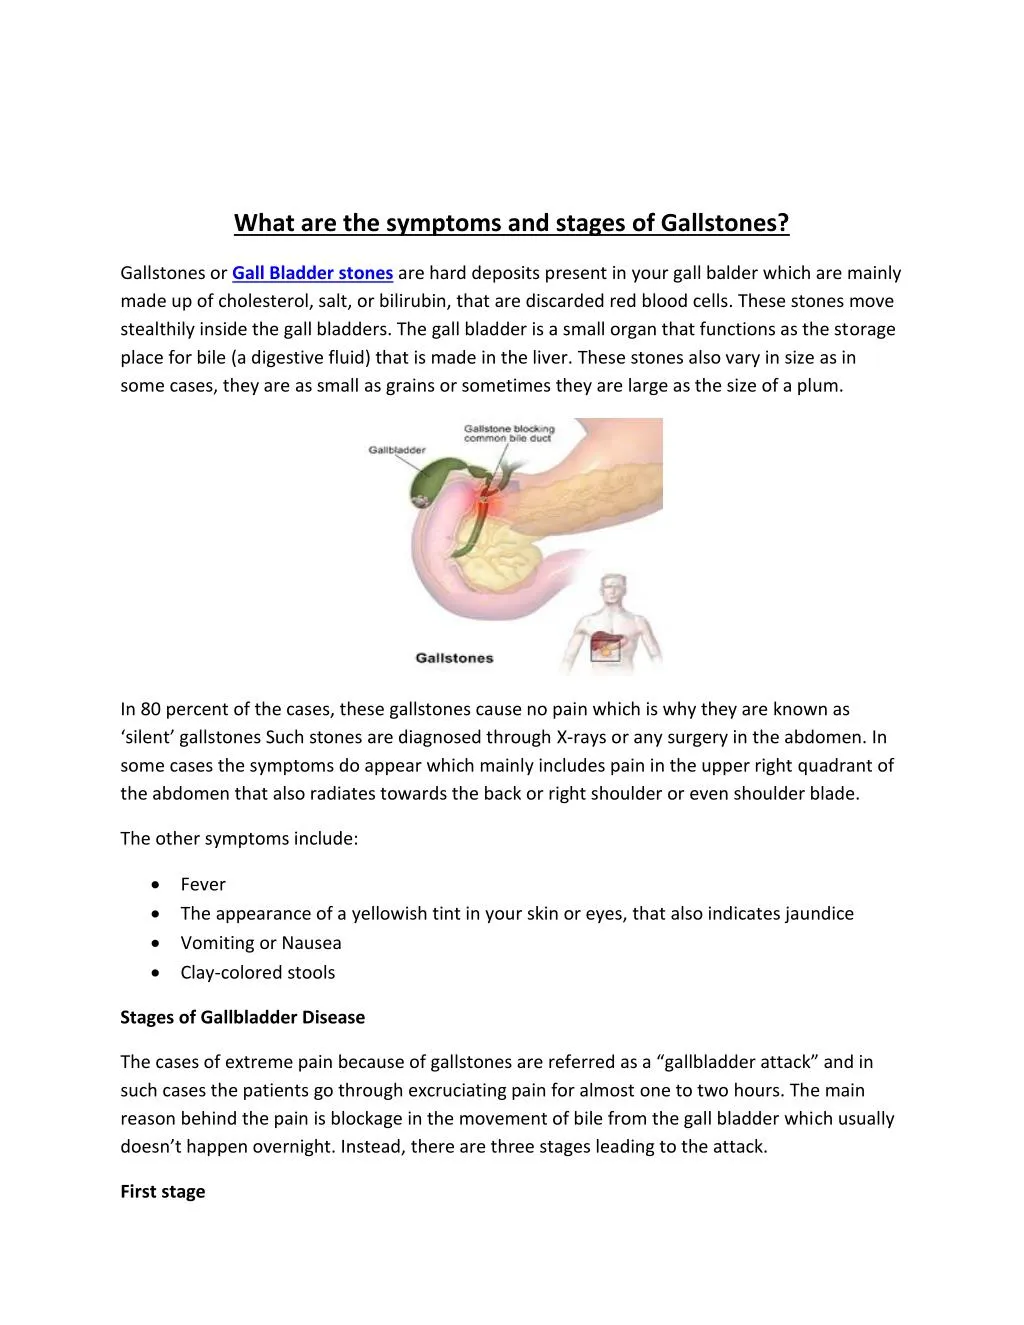 what are the symptoms and stages of gallstones